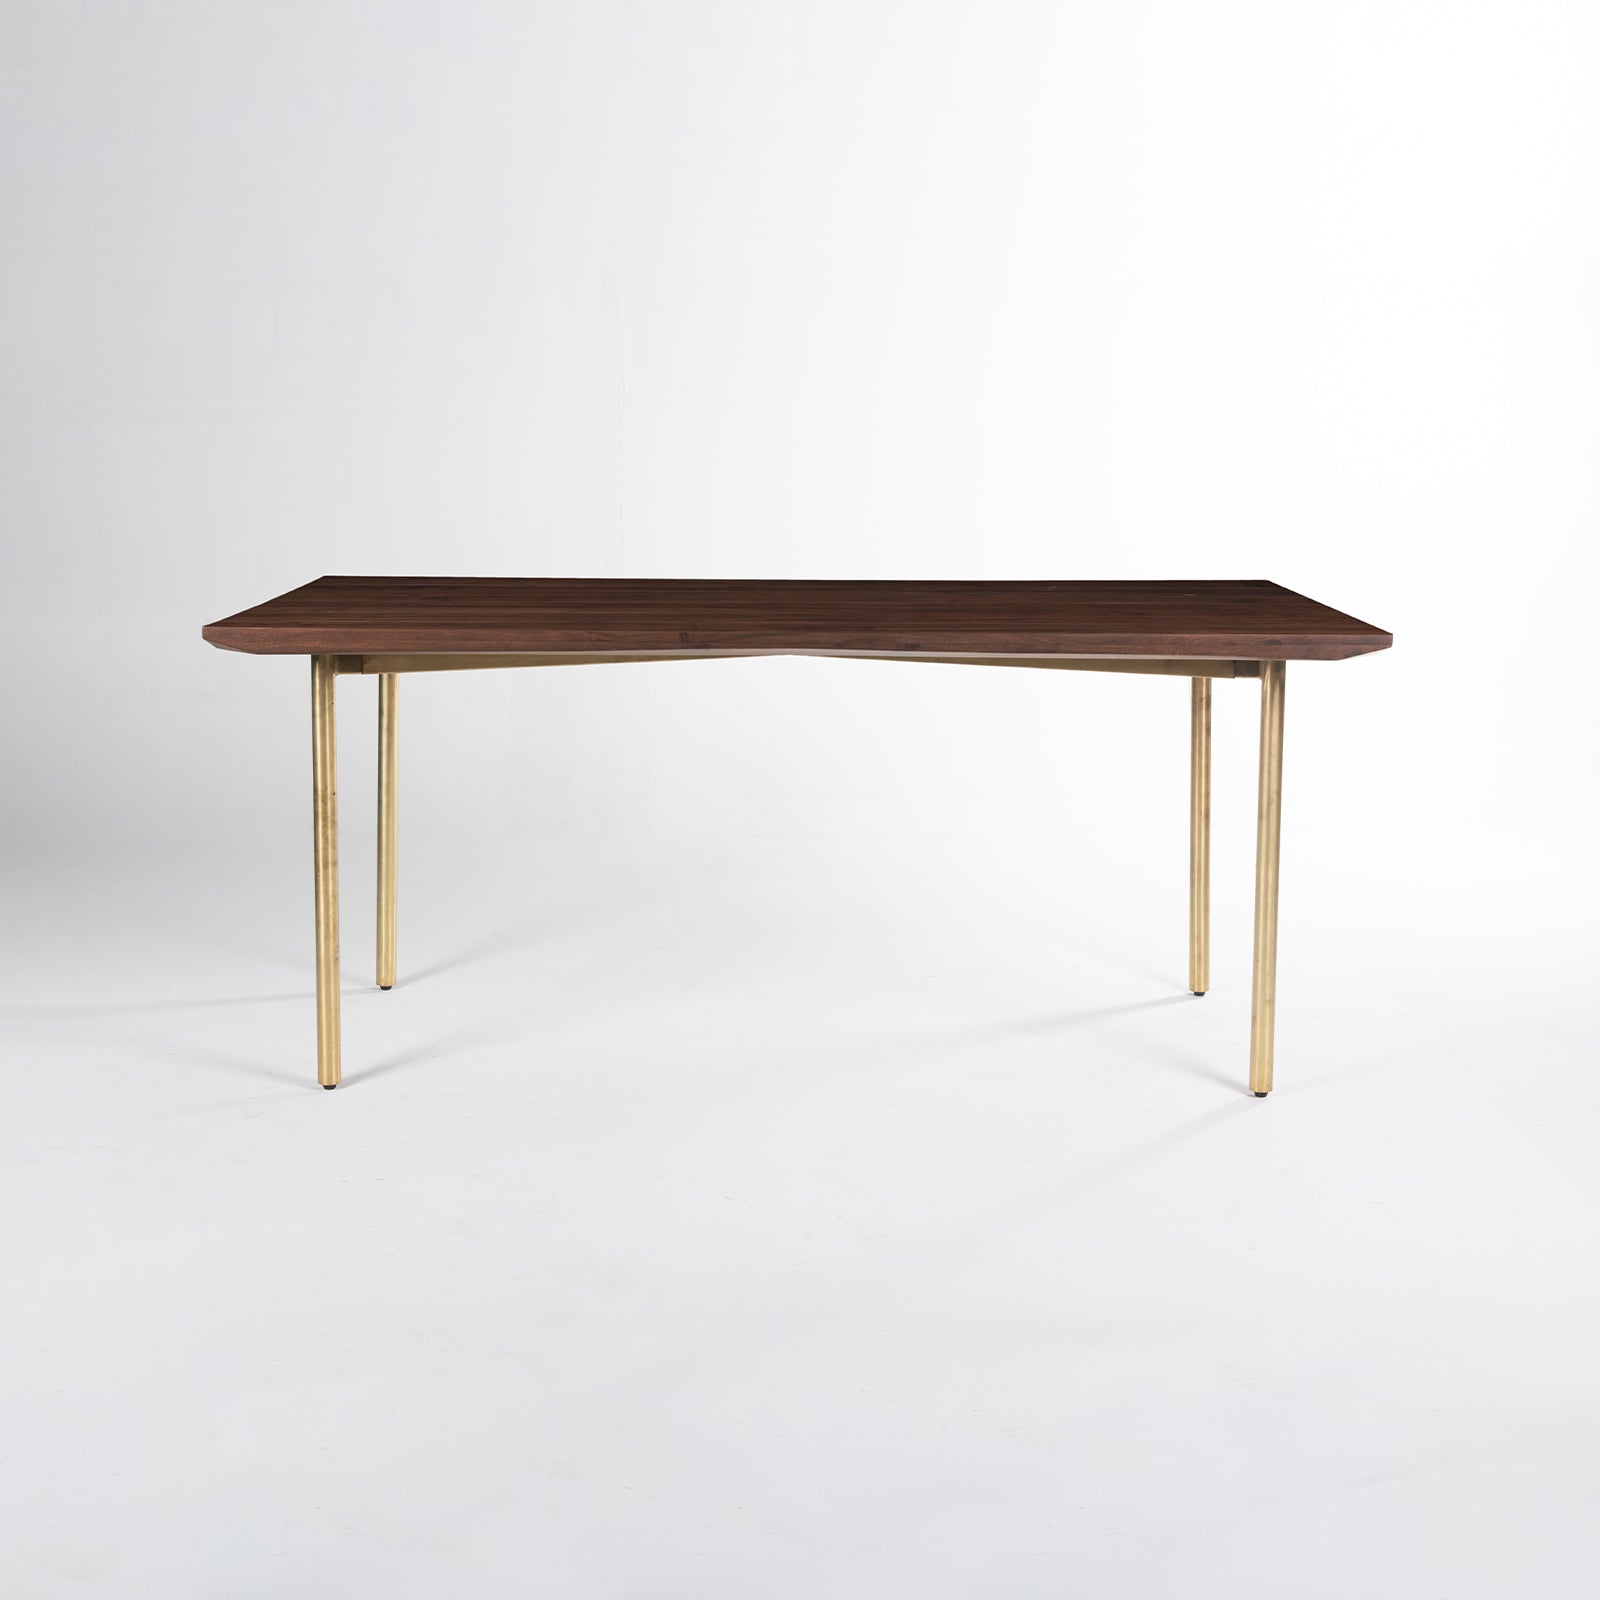 Barcelona Dining Table